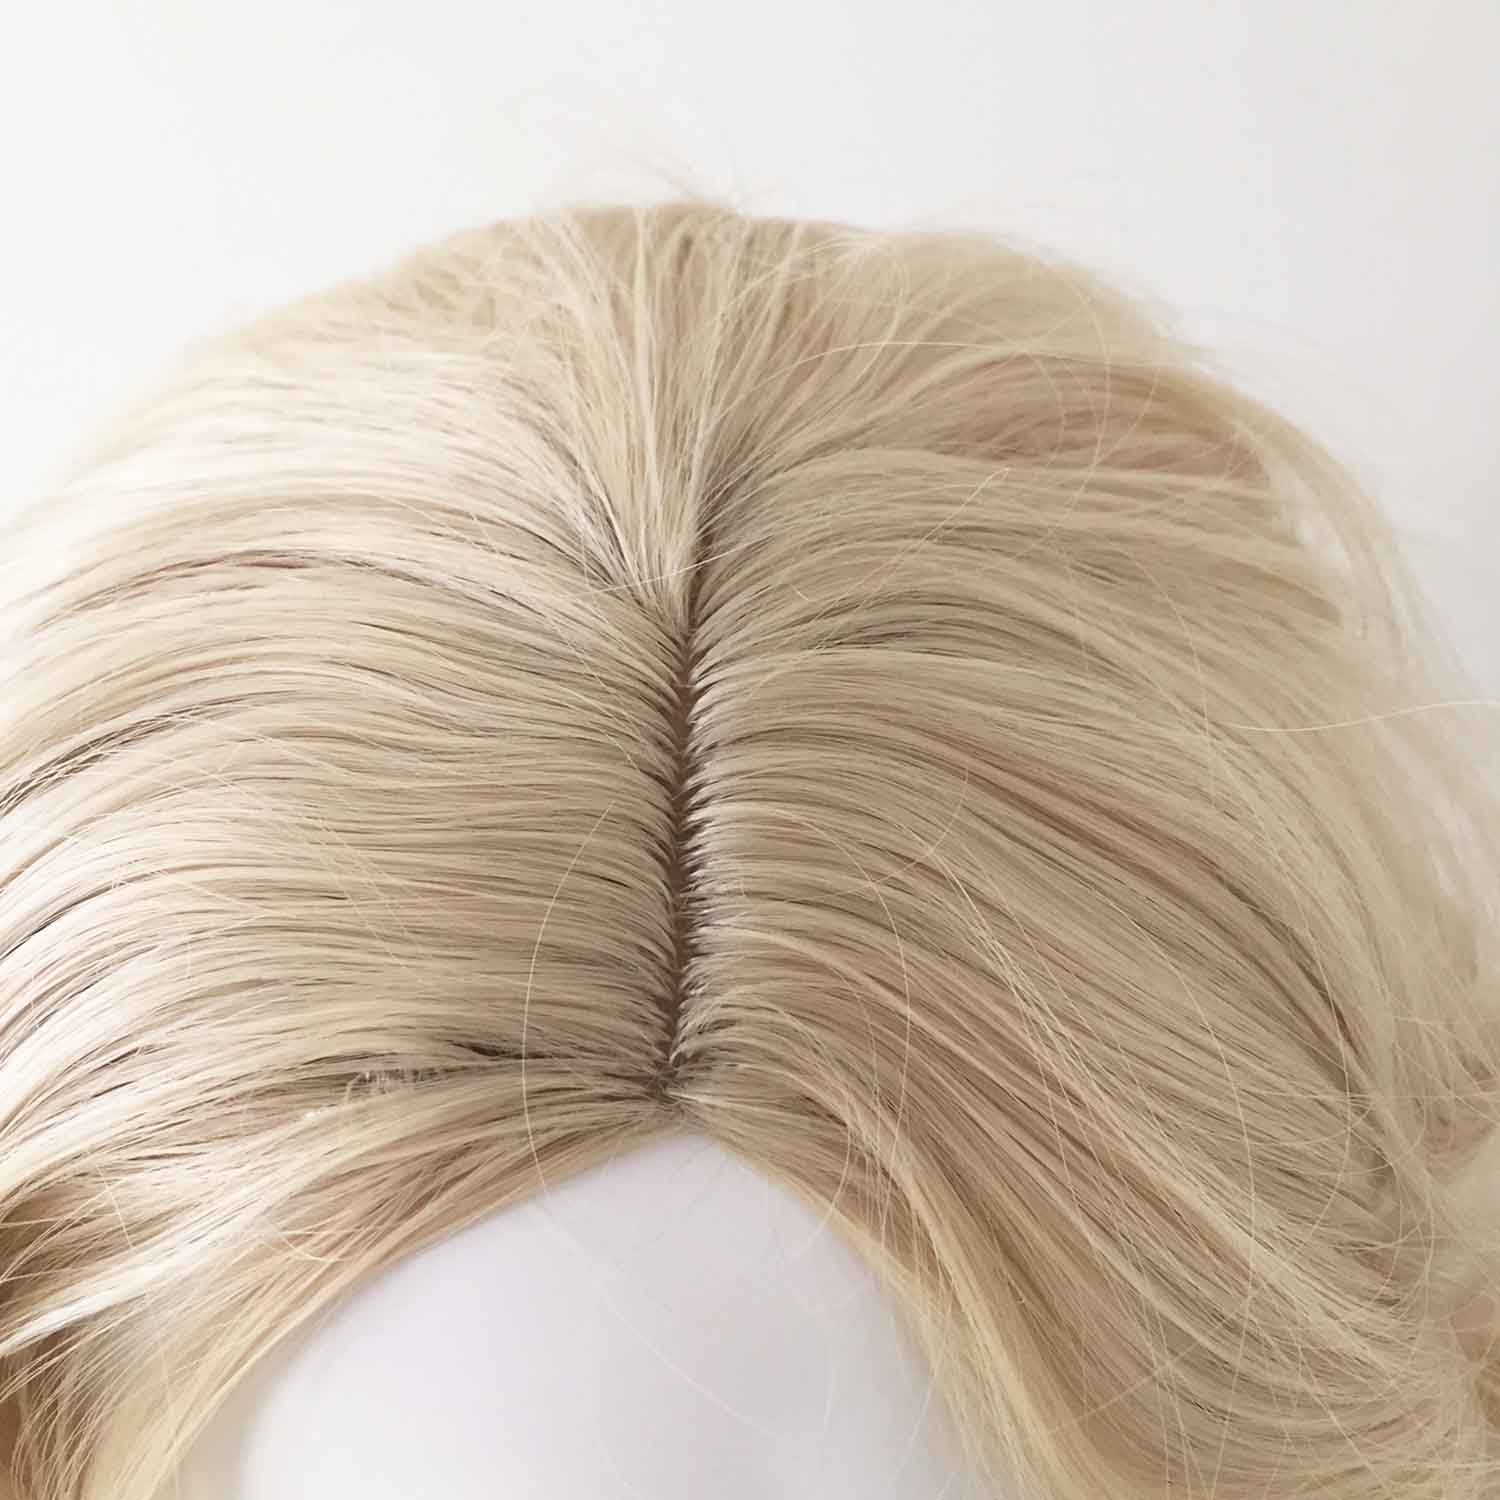 nevermindyrhead Women Blonde Long Curly Side Part Different Length Cosplay Wig